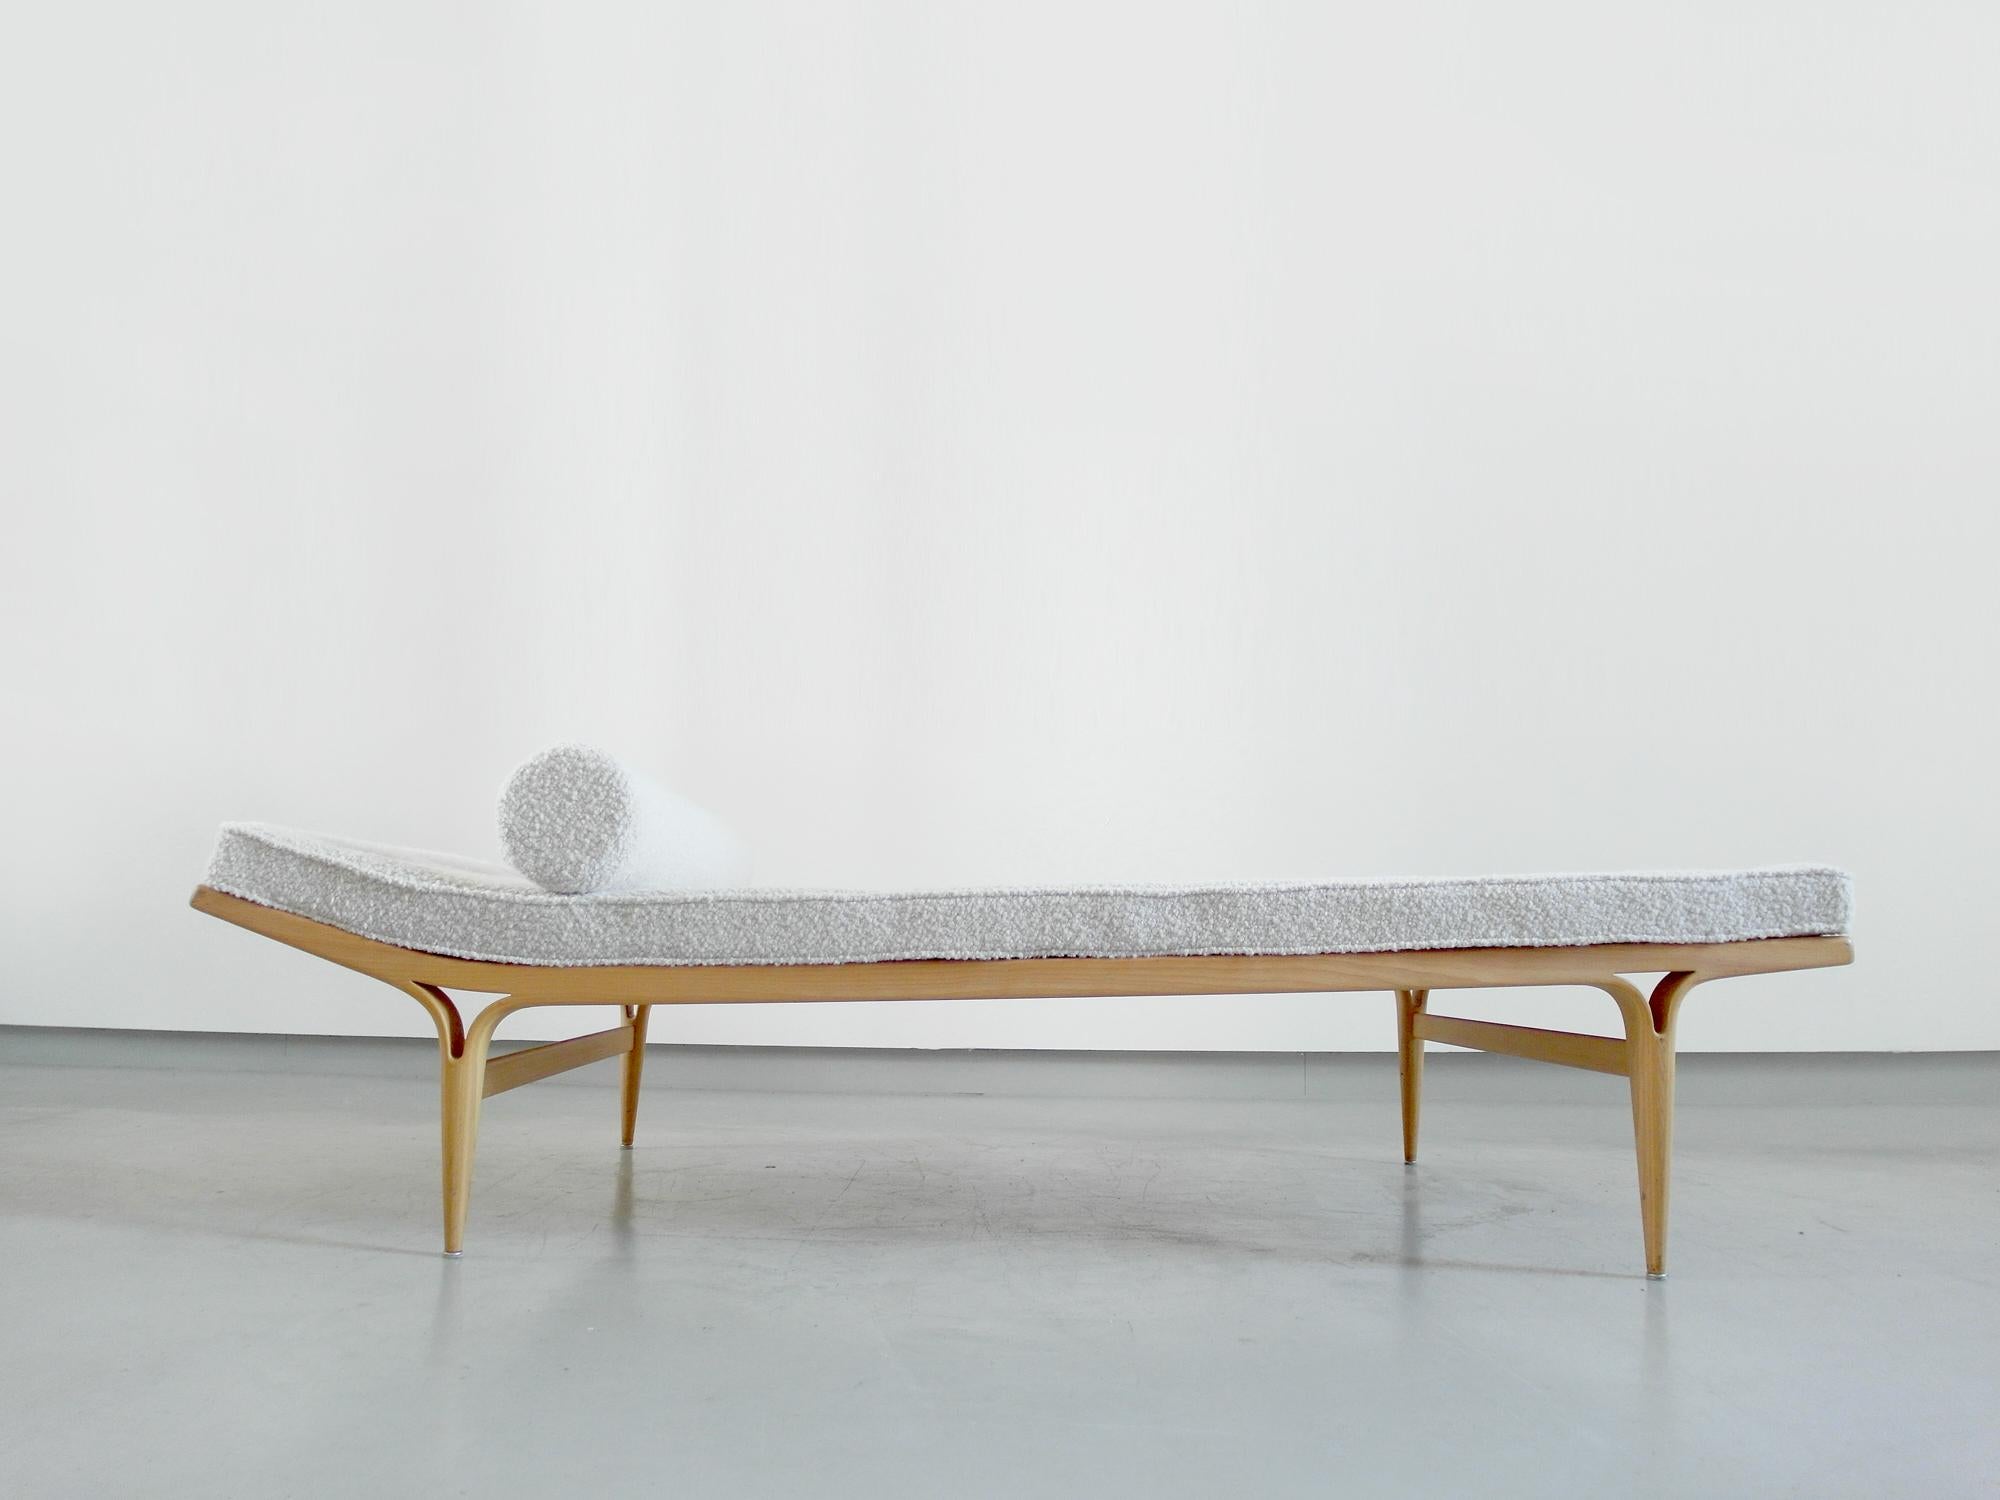 A rare birchwood Berlin daybed designed by Bruno Mathsson, Sweden 1957. This iconic Scandinavian daybed is known as the Berlin daybed, since it was first shown in 1957 at the International Building Exhibition in Berlin. This is for the elegant sleek